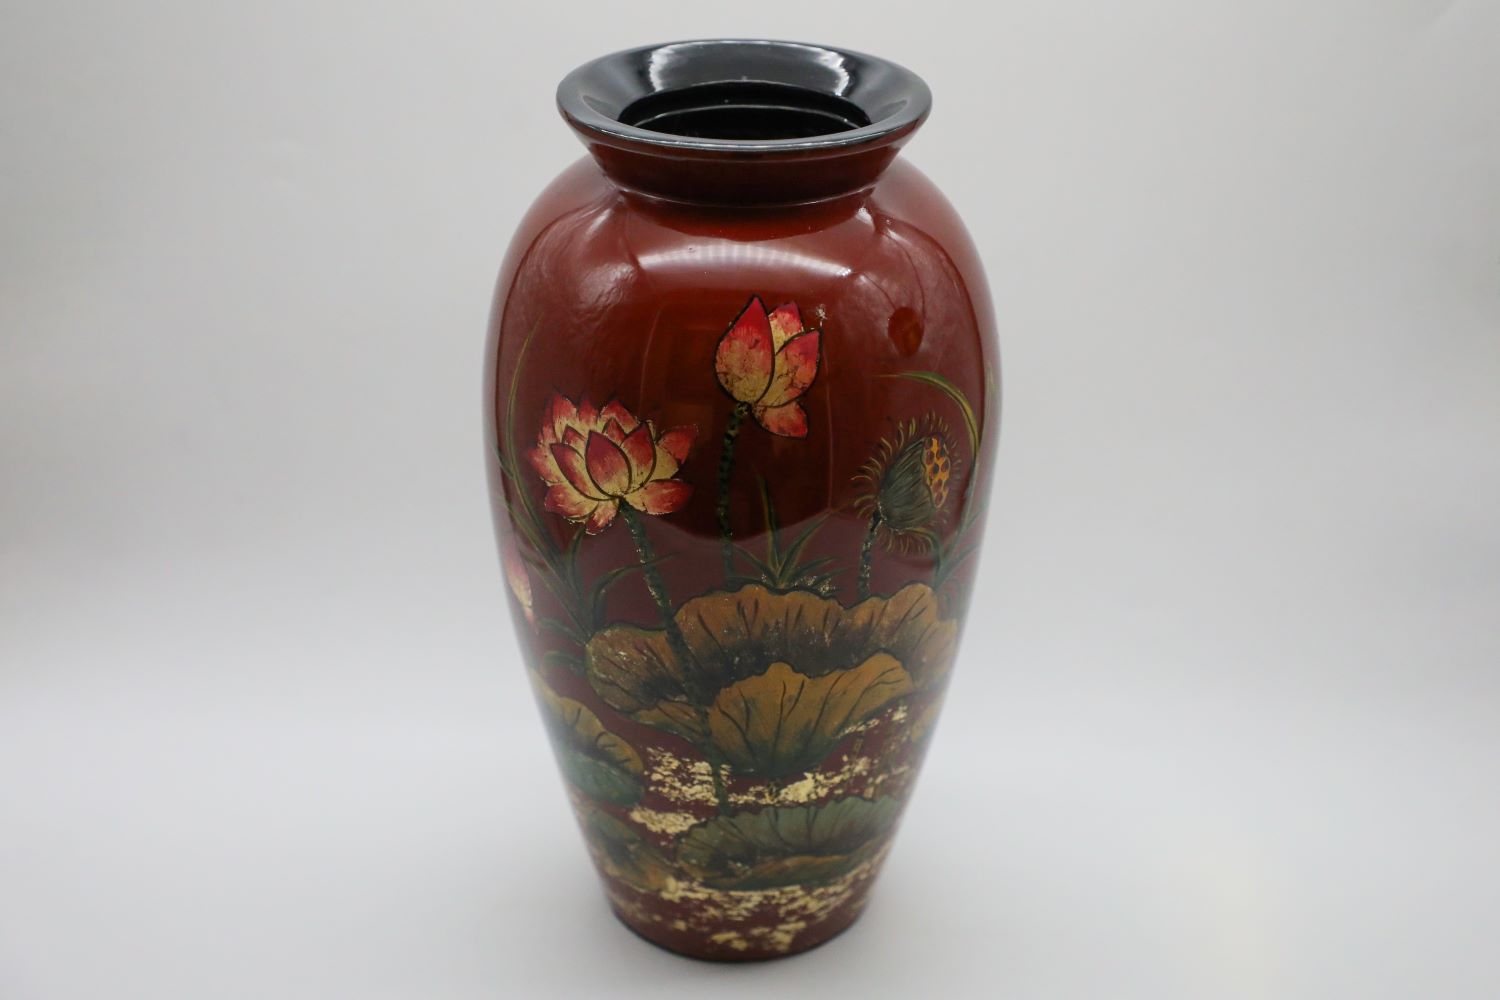 Vase of Early Dew 01 - Vietnamese Ceramic Vase by Artist Dinh Thi Thanh